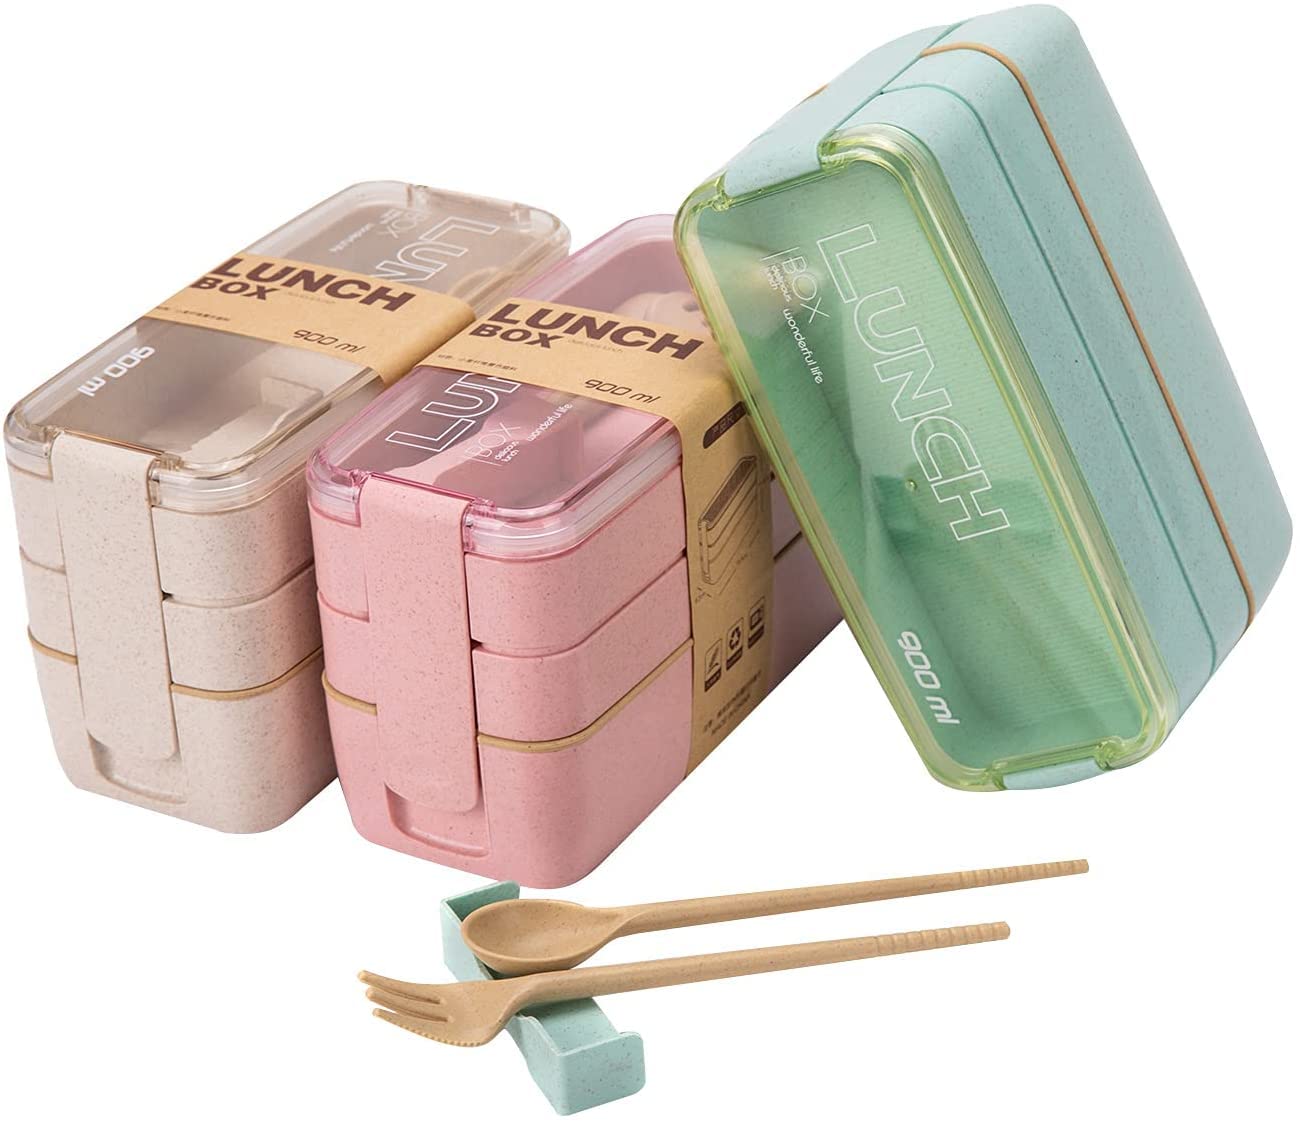 3 Layers Wheat Straw Lunch Box Containers, Leak Proof Bento Box